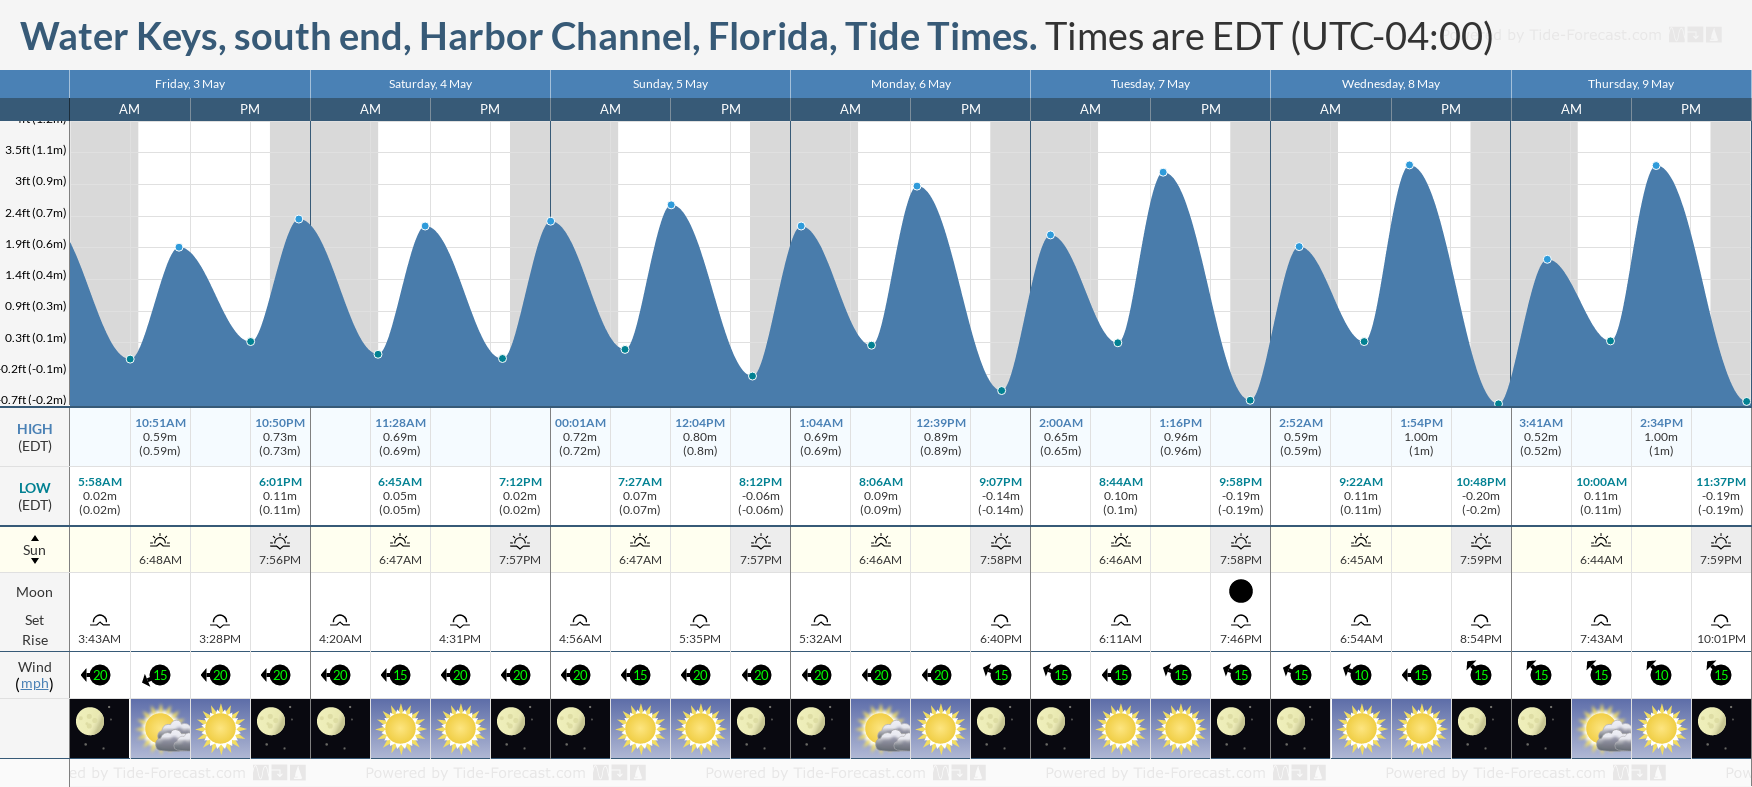 Water Keys, south end, Harbor Channel, Florida Tide Chart including high and low tide tide times for the next 7 days